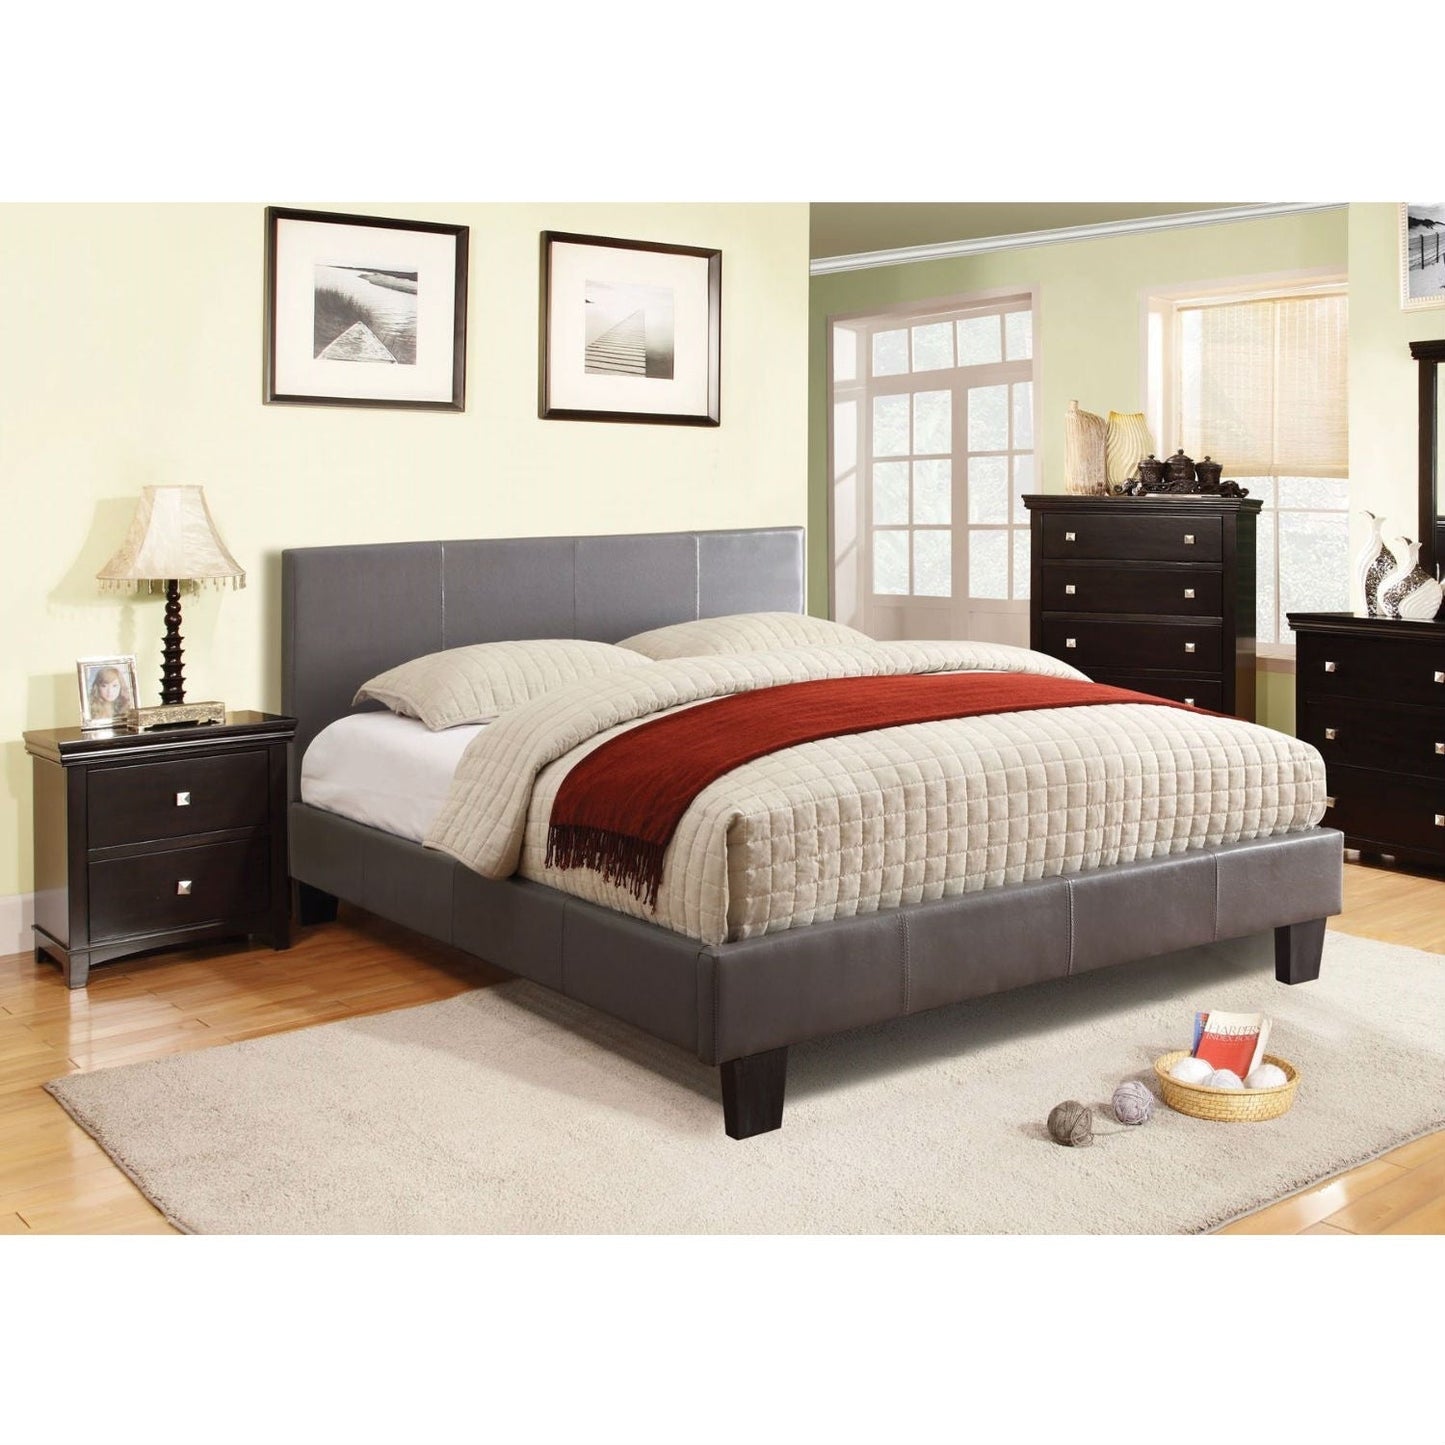 Bedroom > Bed Frames > Platform Beds - Queen Size Platform Bed With Headboard Upholstered In Gray Faux Leather